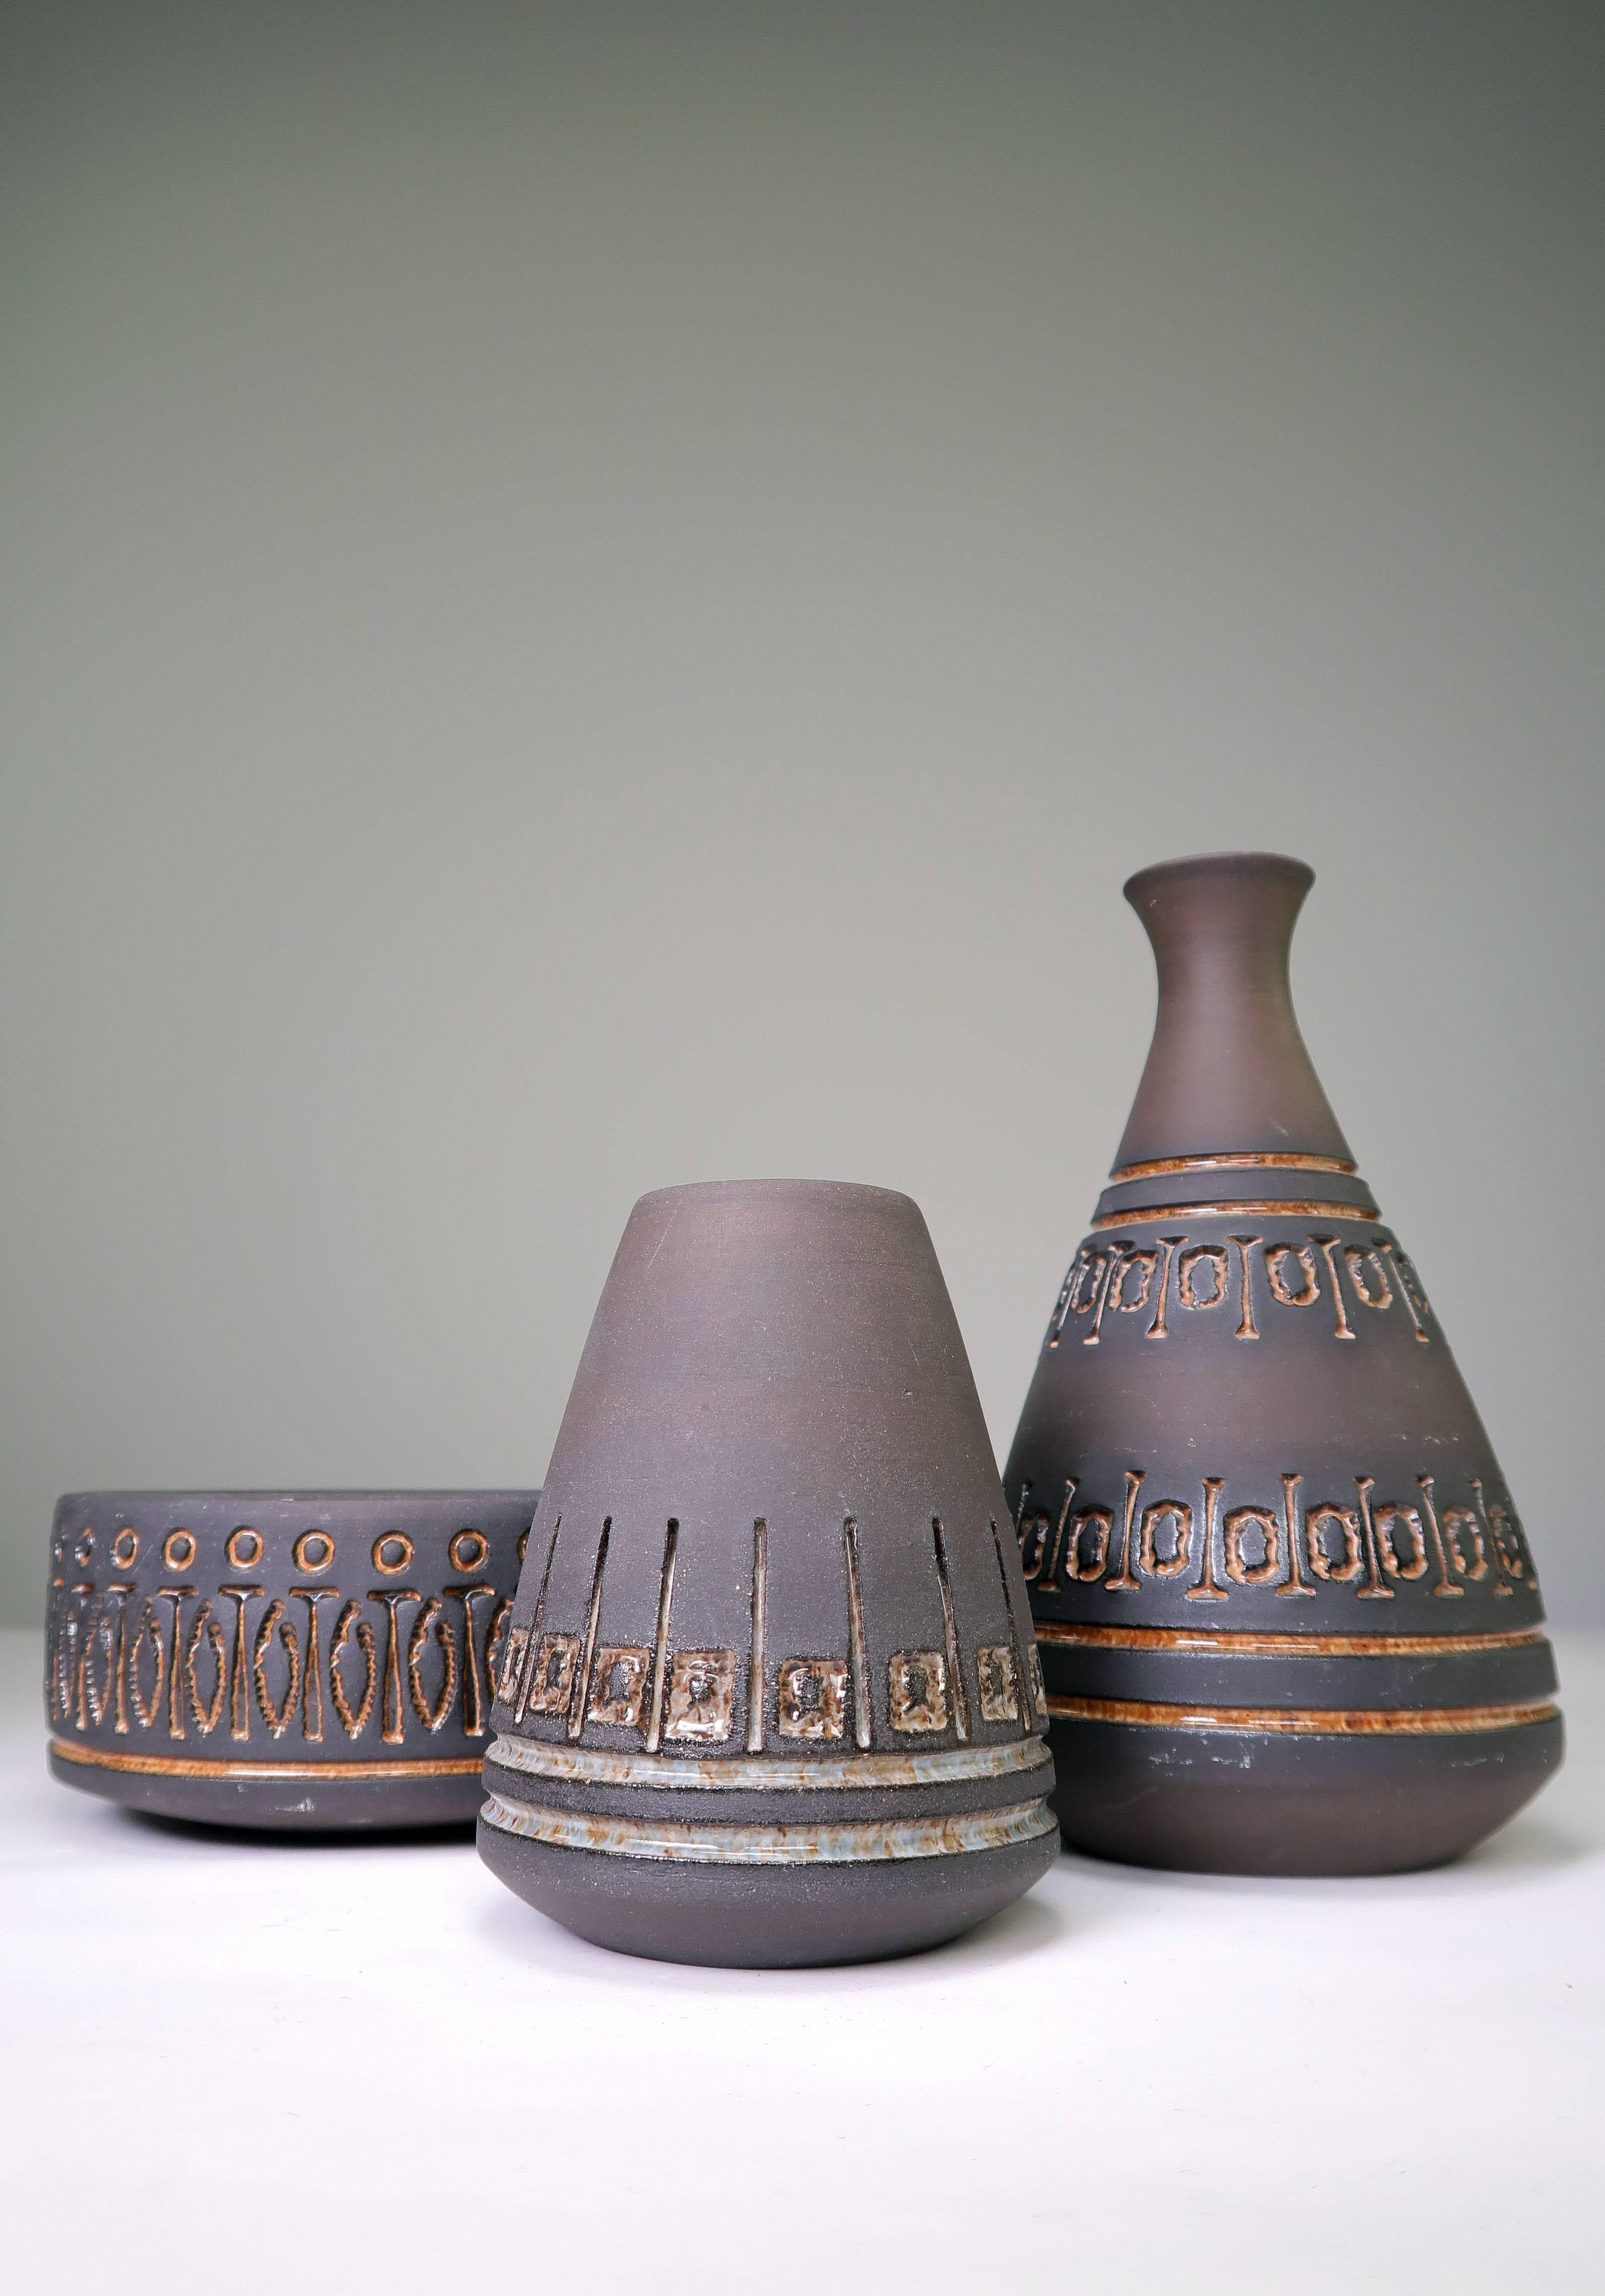 Set of three items. Two Mid Century Scandinavian Modern rustic vases and one bowl designed and manufactured by Swedish ceramic artist Ulla Winblad for Alingsås before she moved to Seattle in 1967. Manufactured in 1960s in the small town of Alingsås